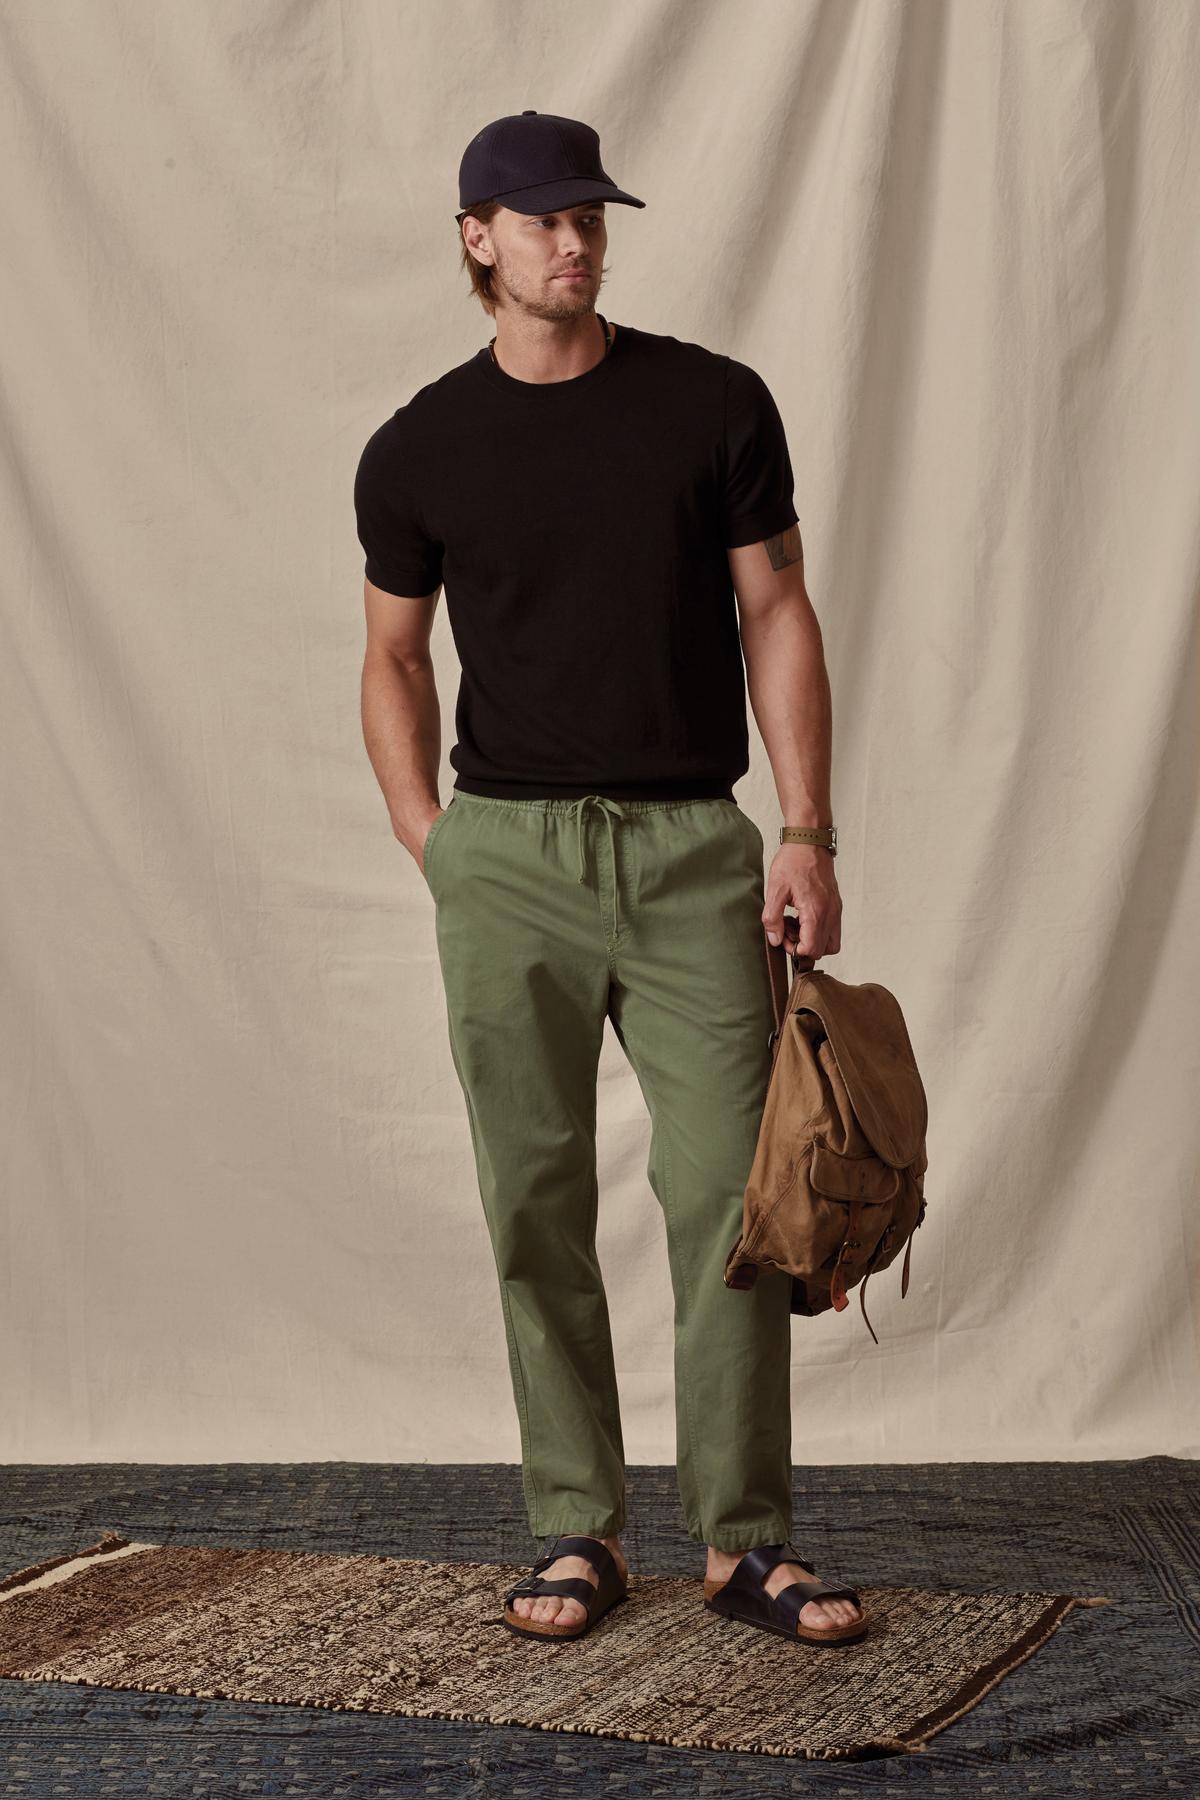 A man in a black t-shirt, green pants, and sandals, wearing a cap and holding a backpack, stands on a Velvet by Graham & Spencer rug against a draped cotton/linen blend canvas background.-36753529405633